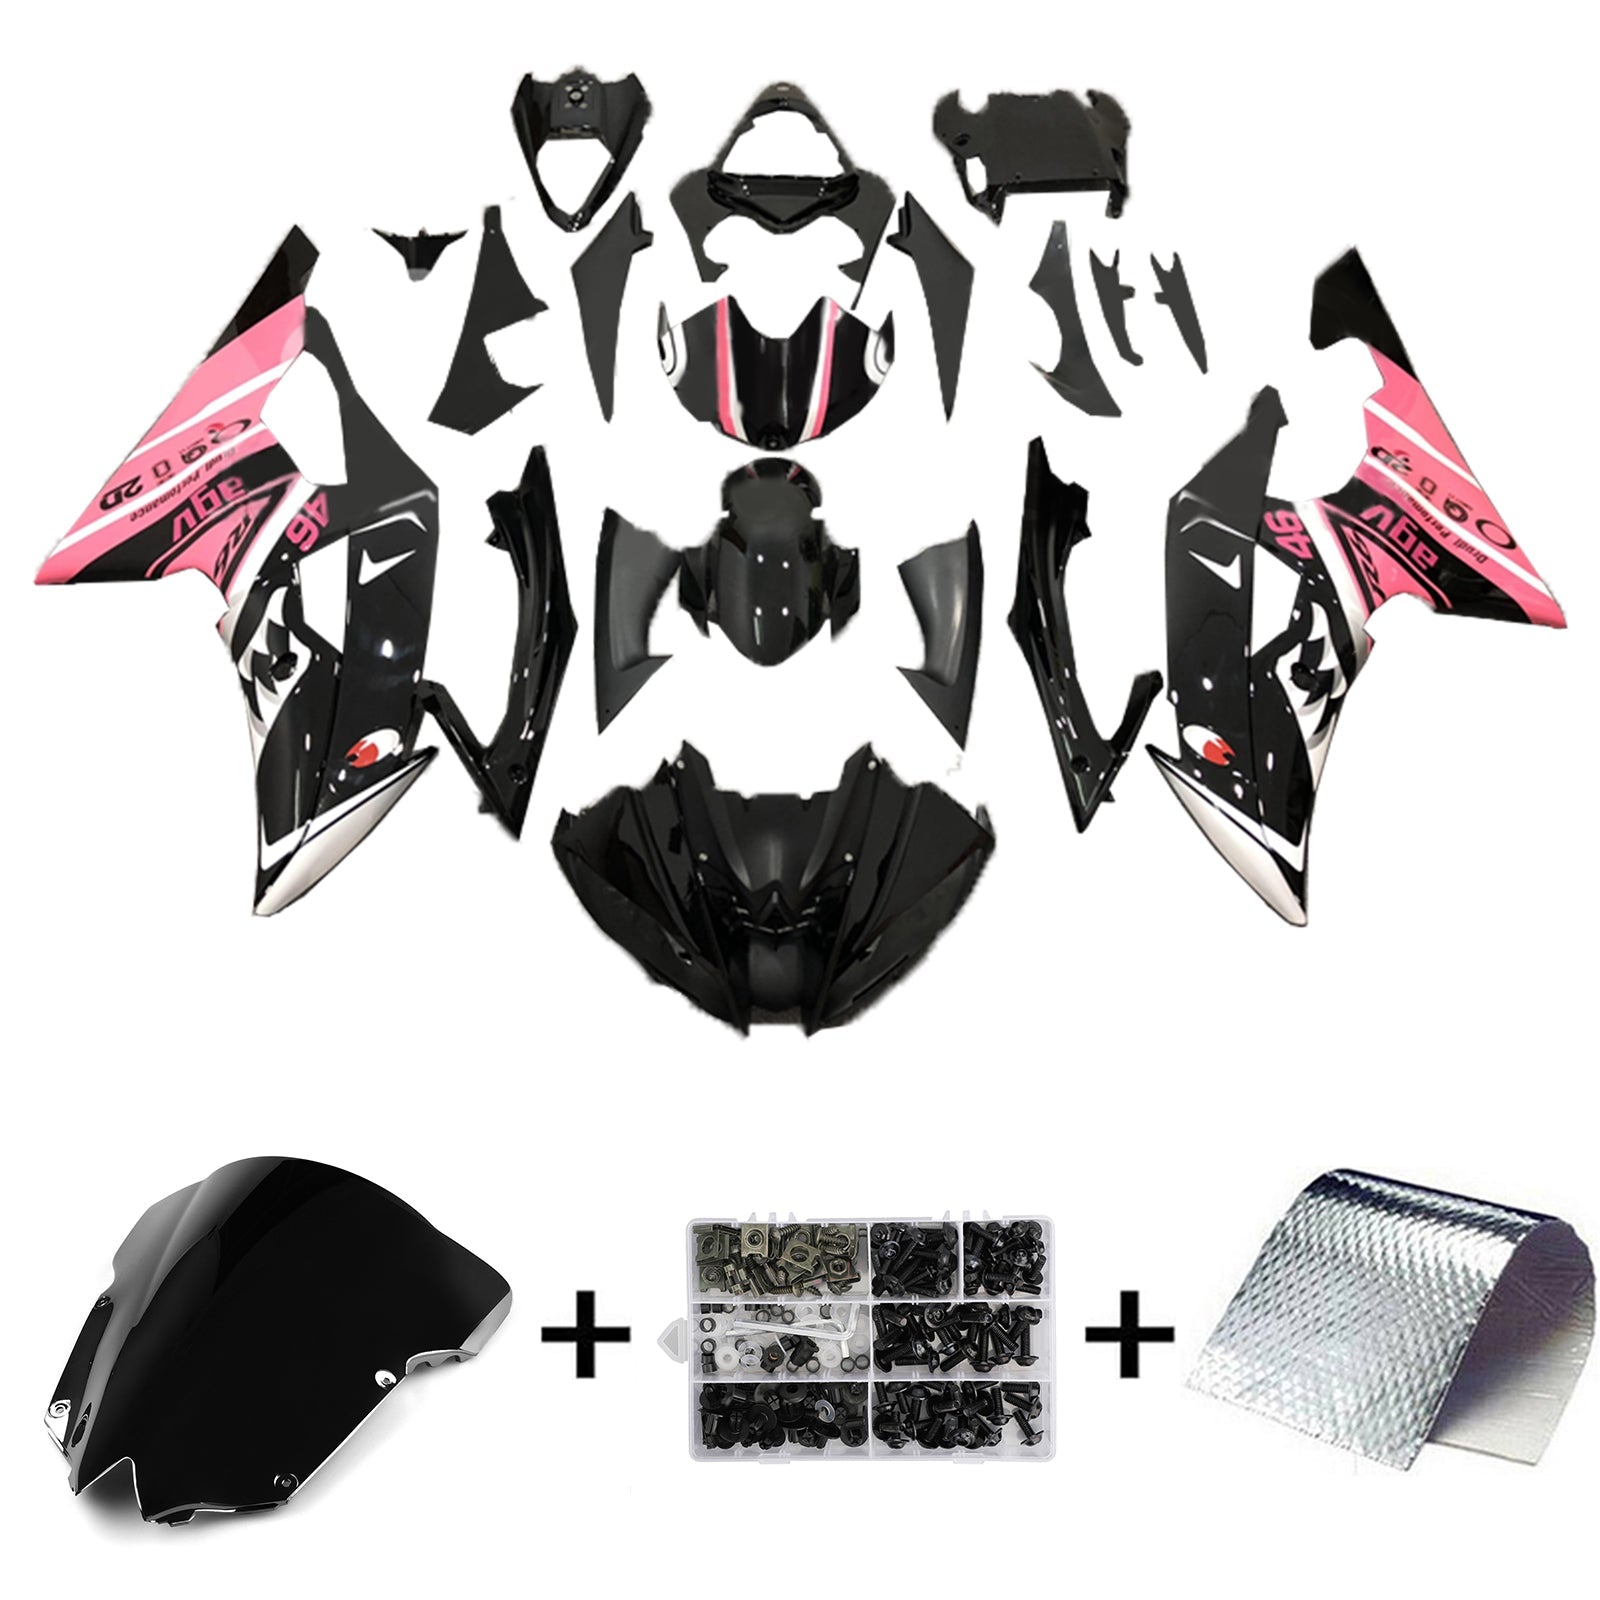 Amotopart Kit carena carrozzeria in plastica ABS per Yamaha YZF 600 R6 2008-2016